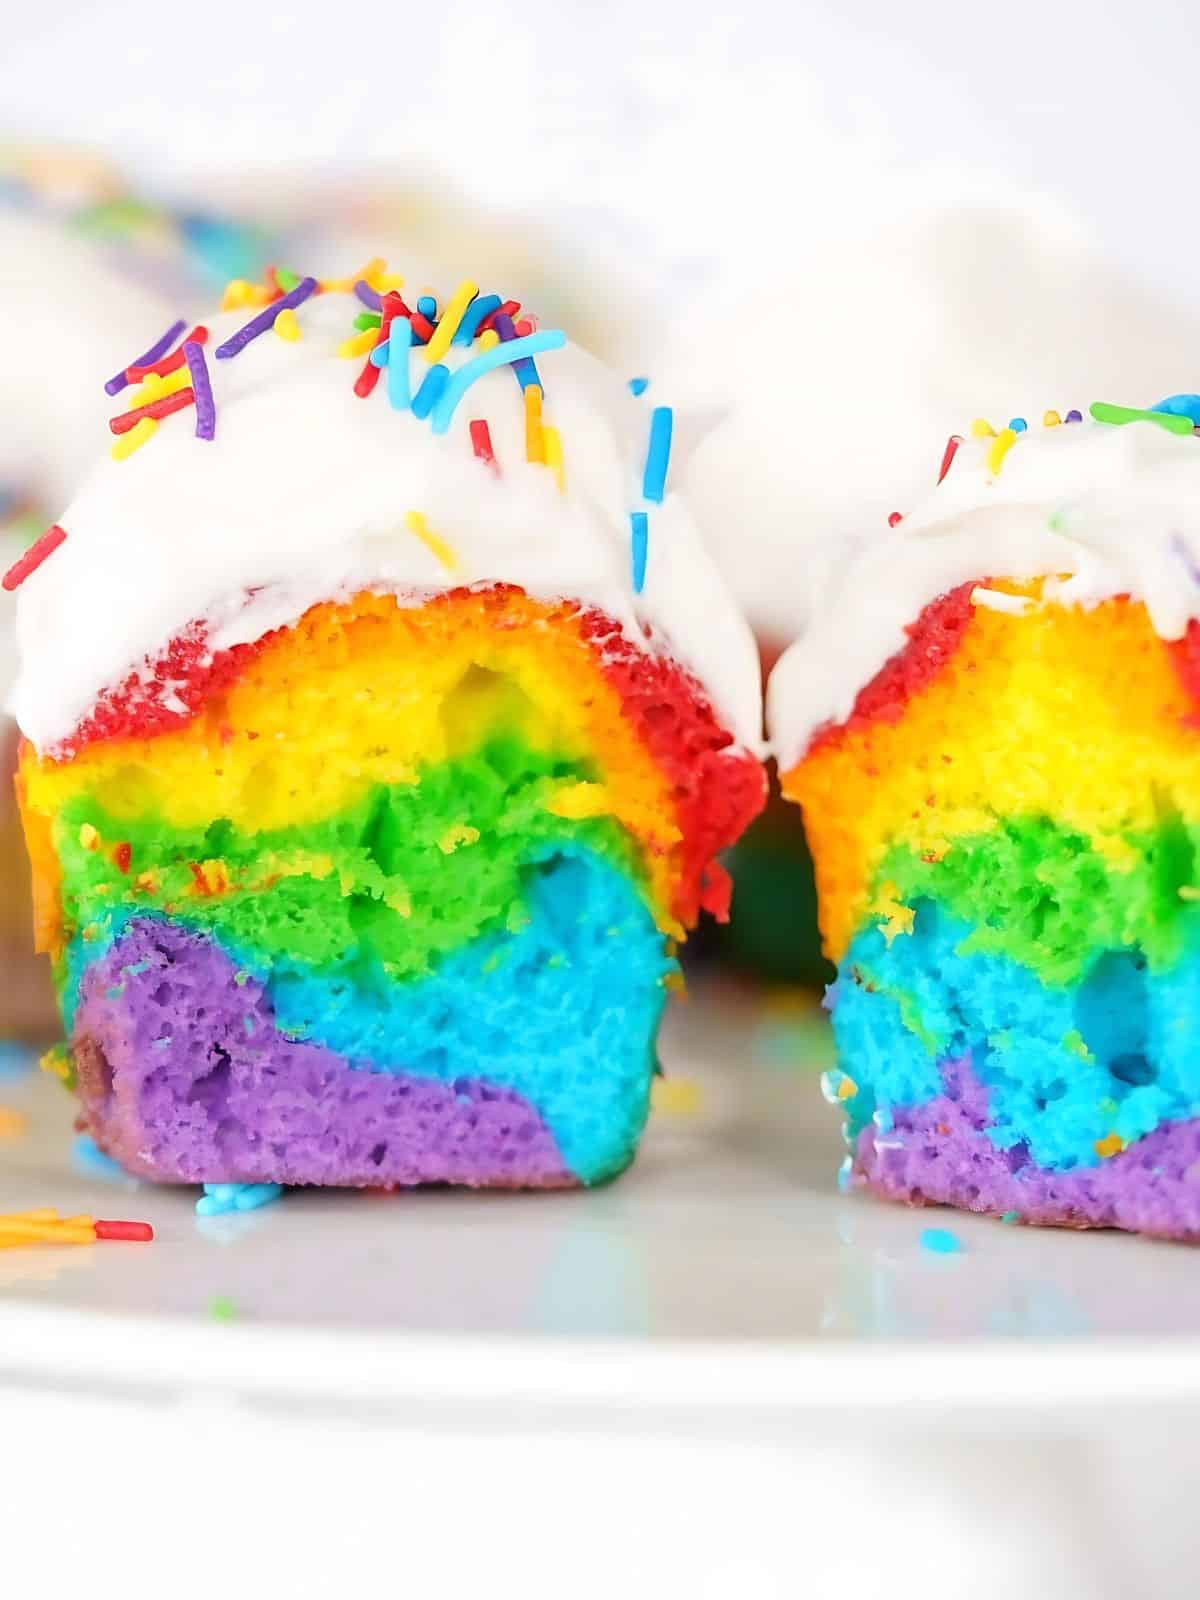 Rainbow cupcakes topped with colorful sprinkles and frosting.